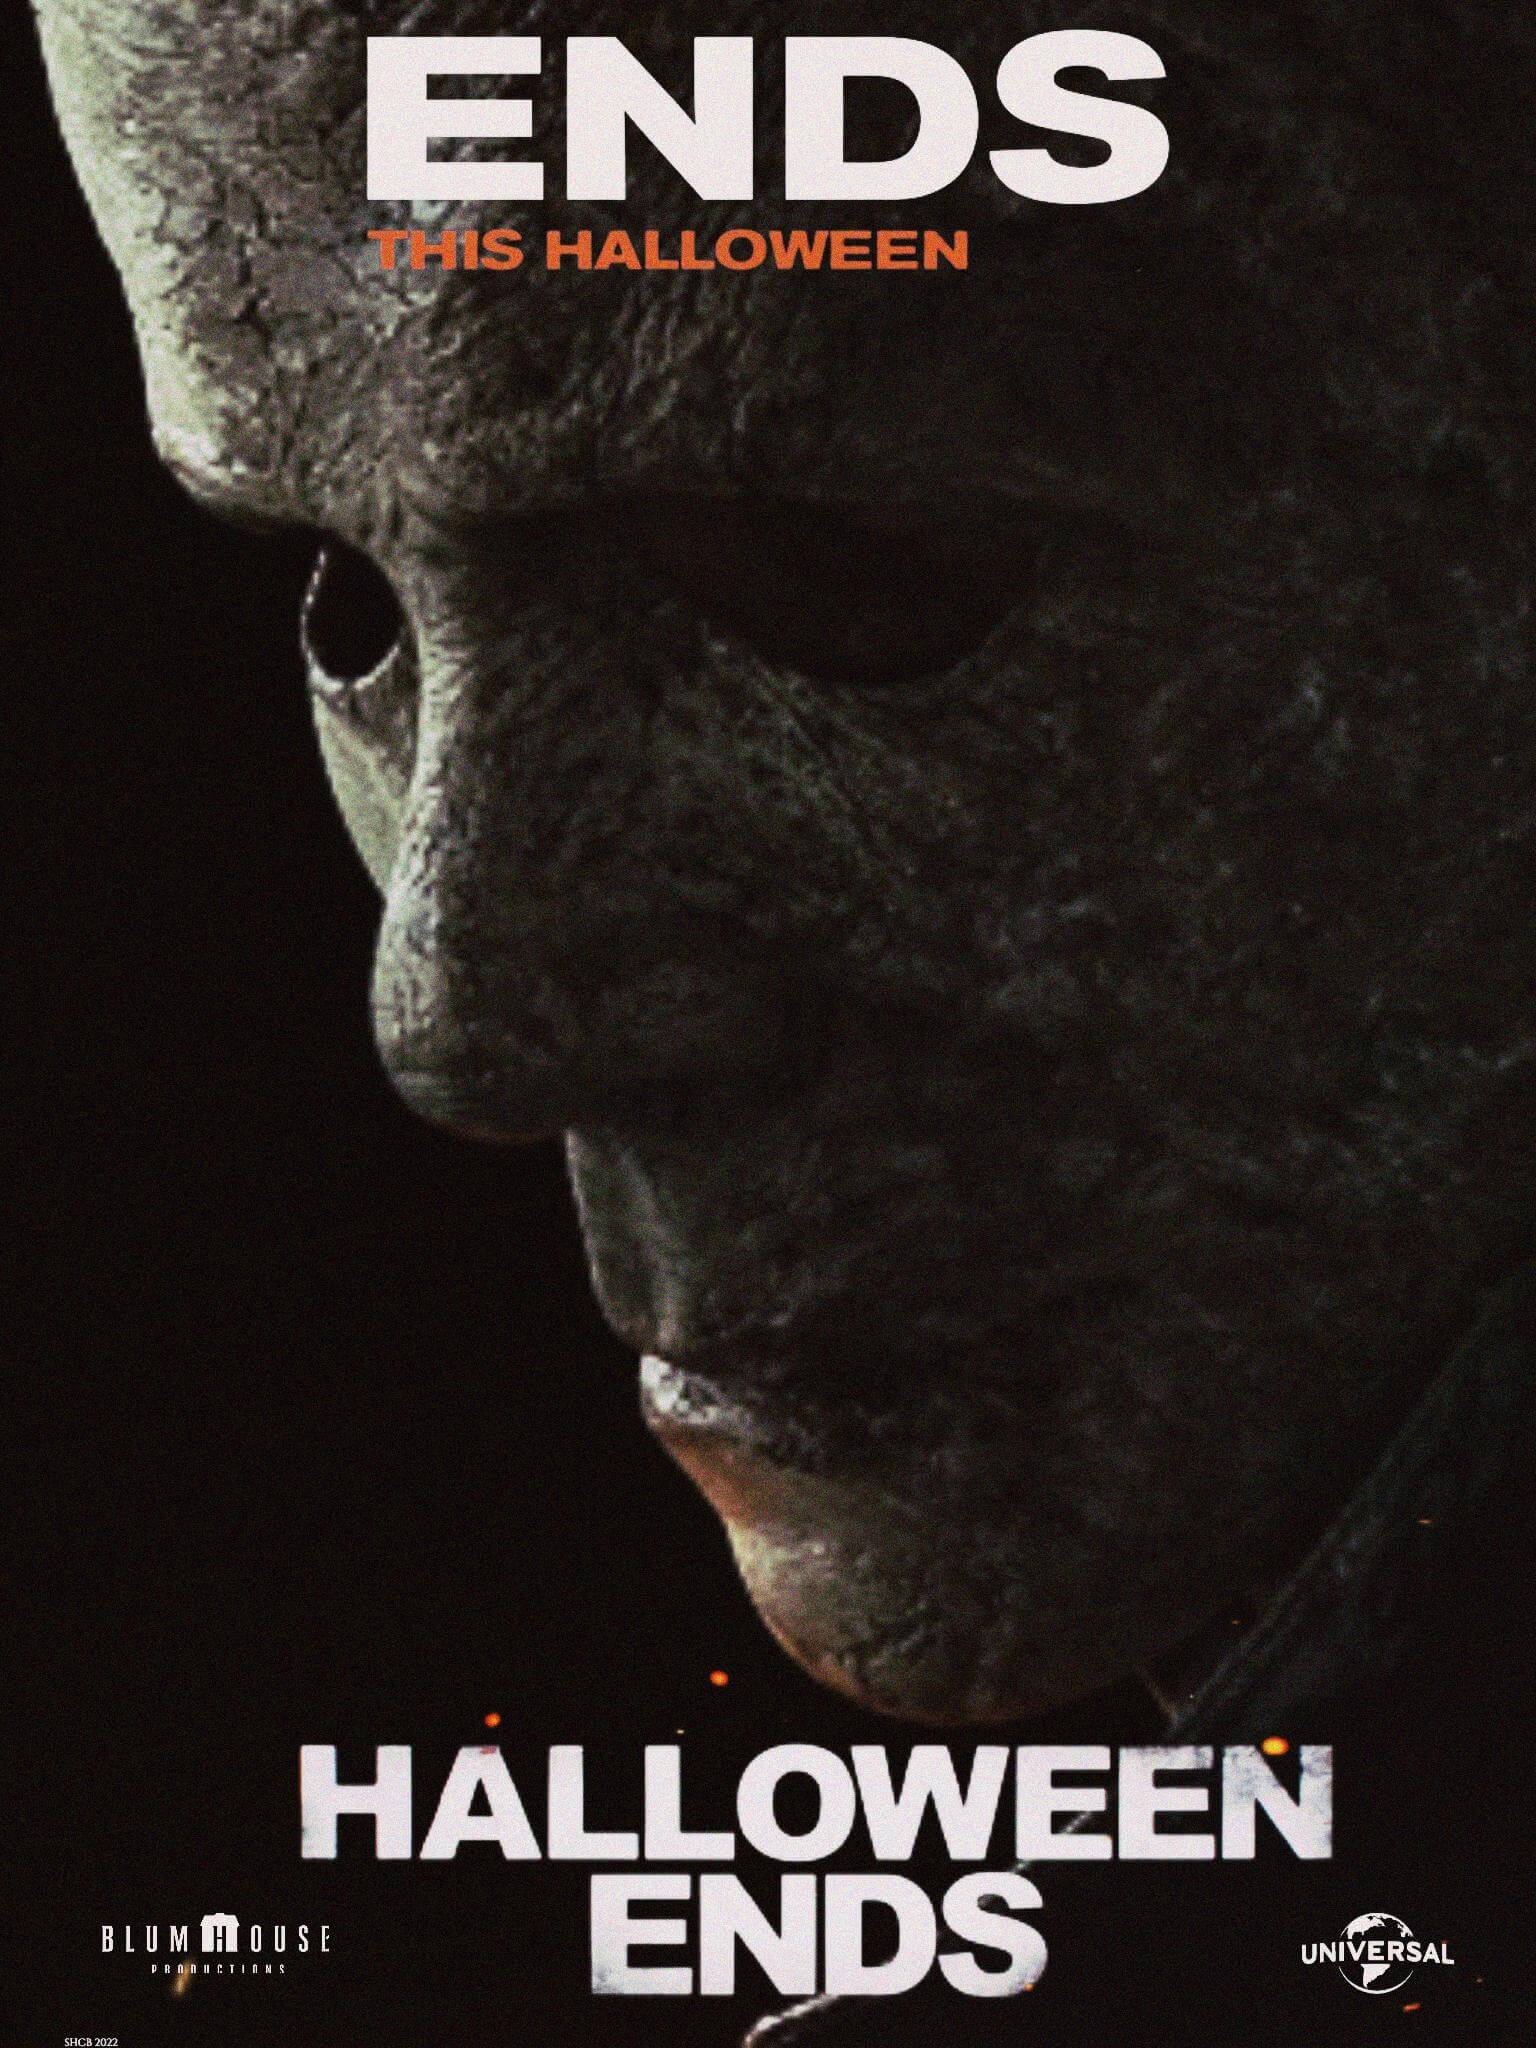 Watch trailer for halloween ends